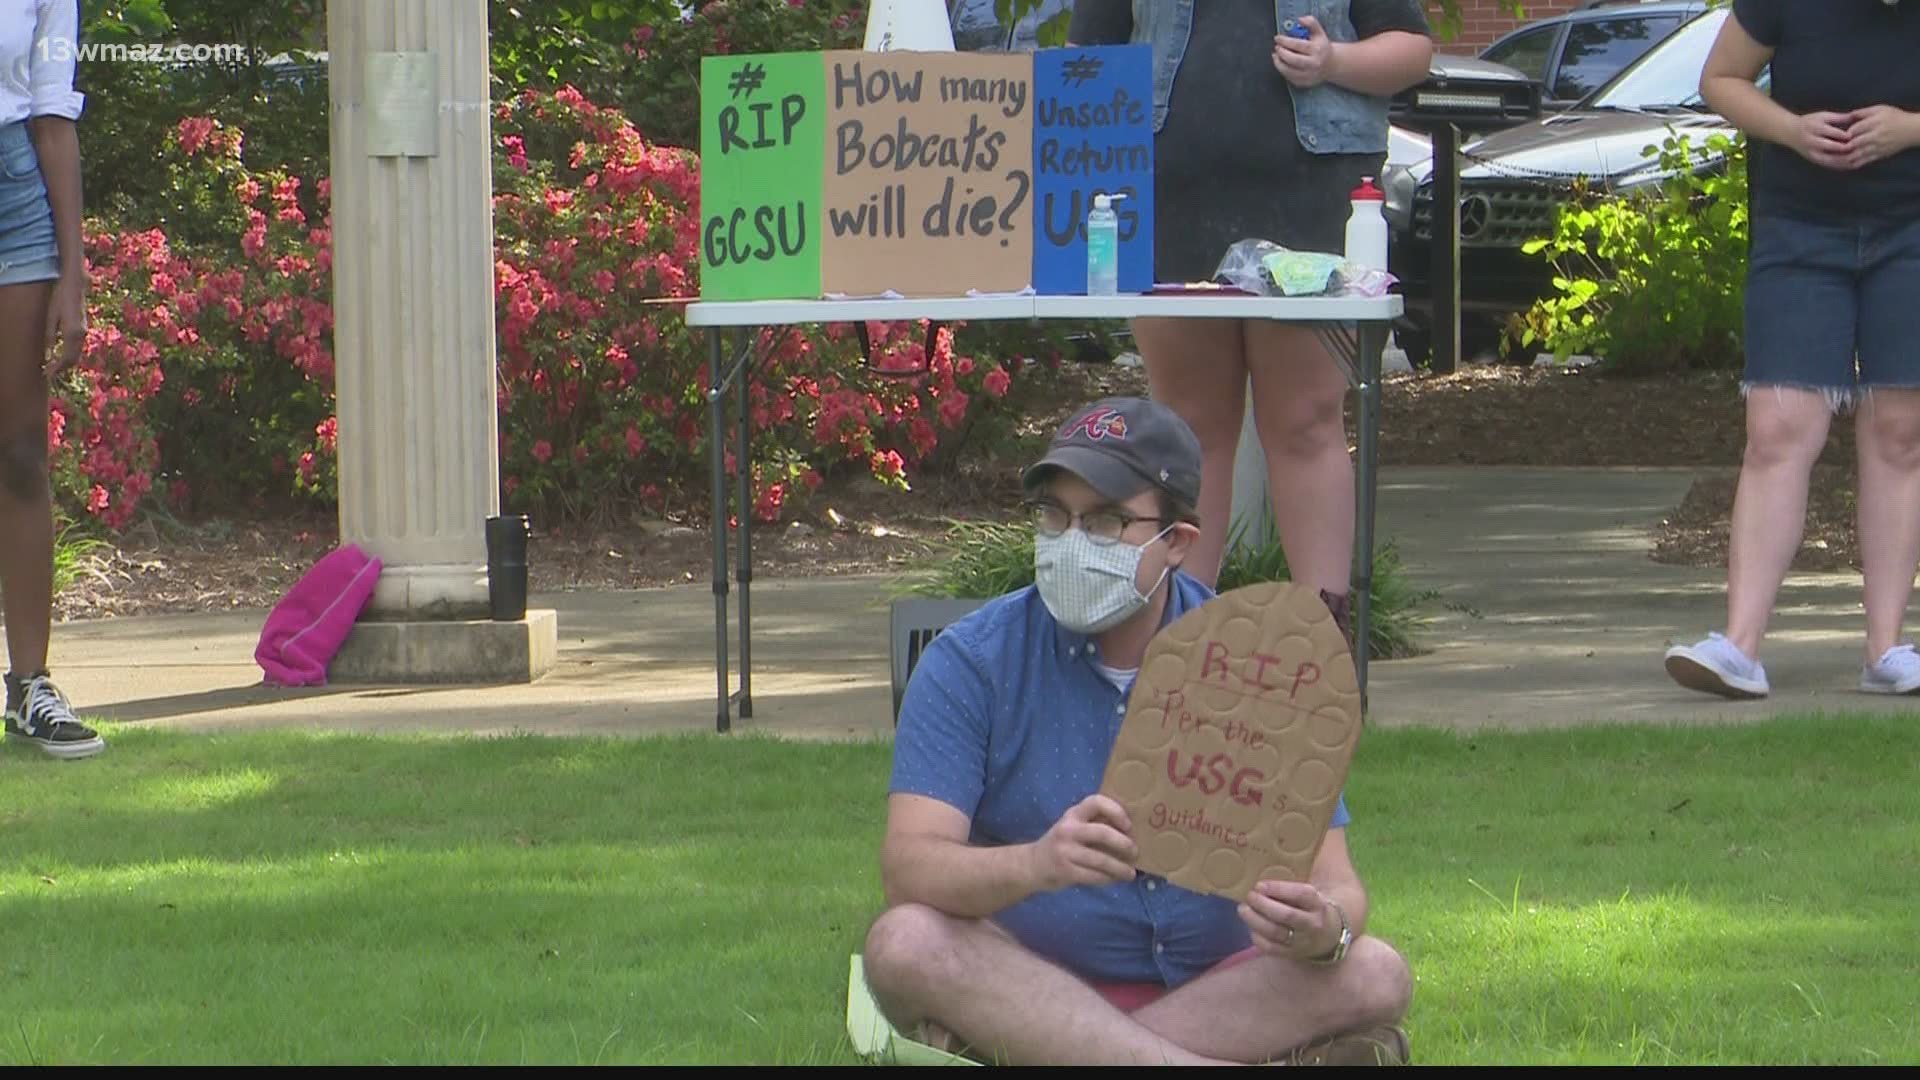 Friday, the United Campus Workers of Georgia held a protest on campus to criticize how the state has handled the pandemic.